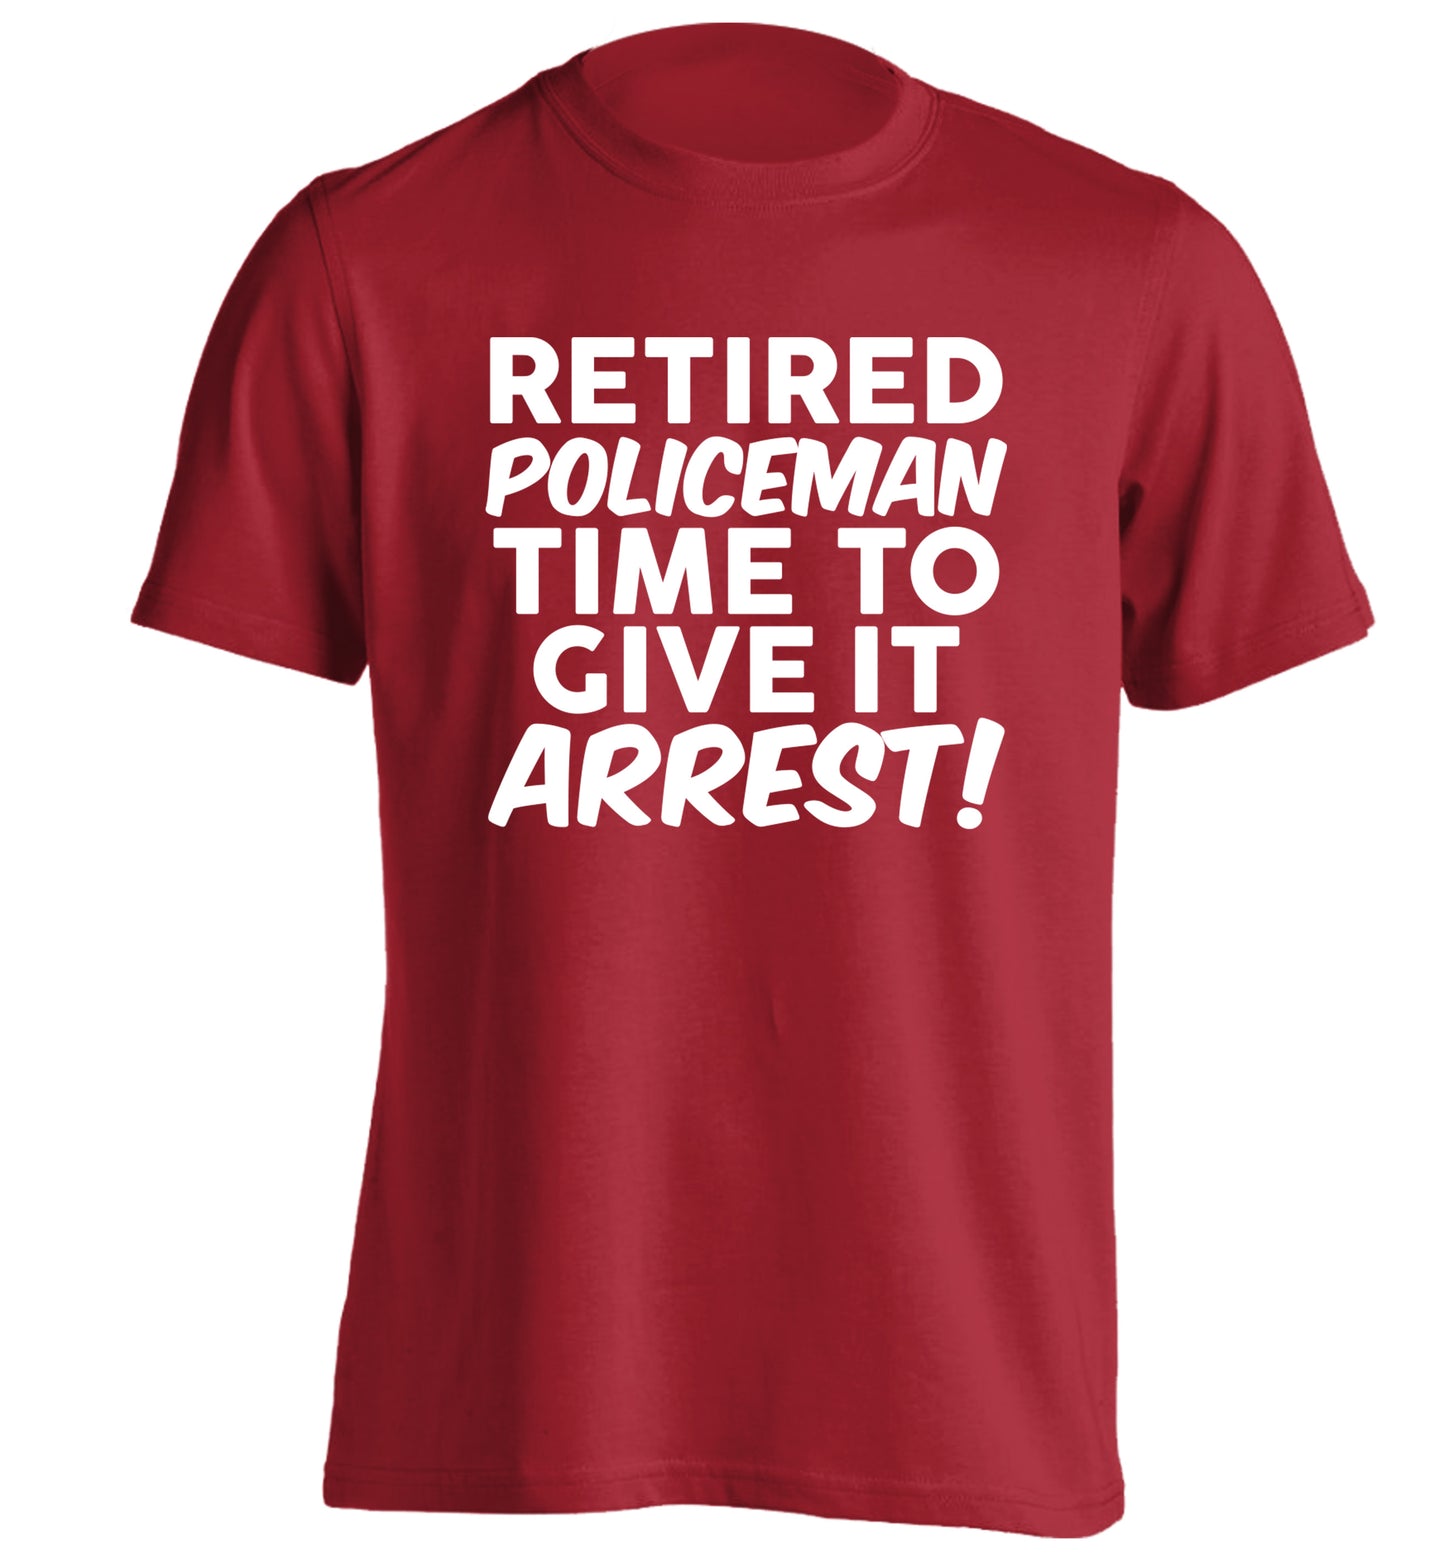 Retired policeman give it arresst! adults unisex red Tshirt 2XL